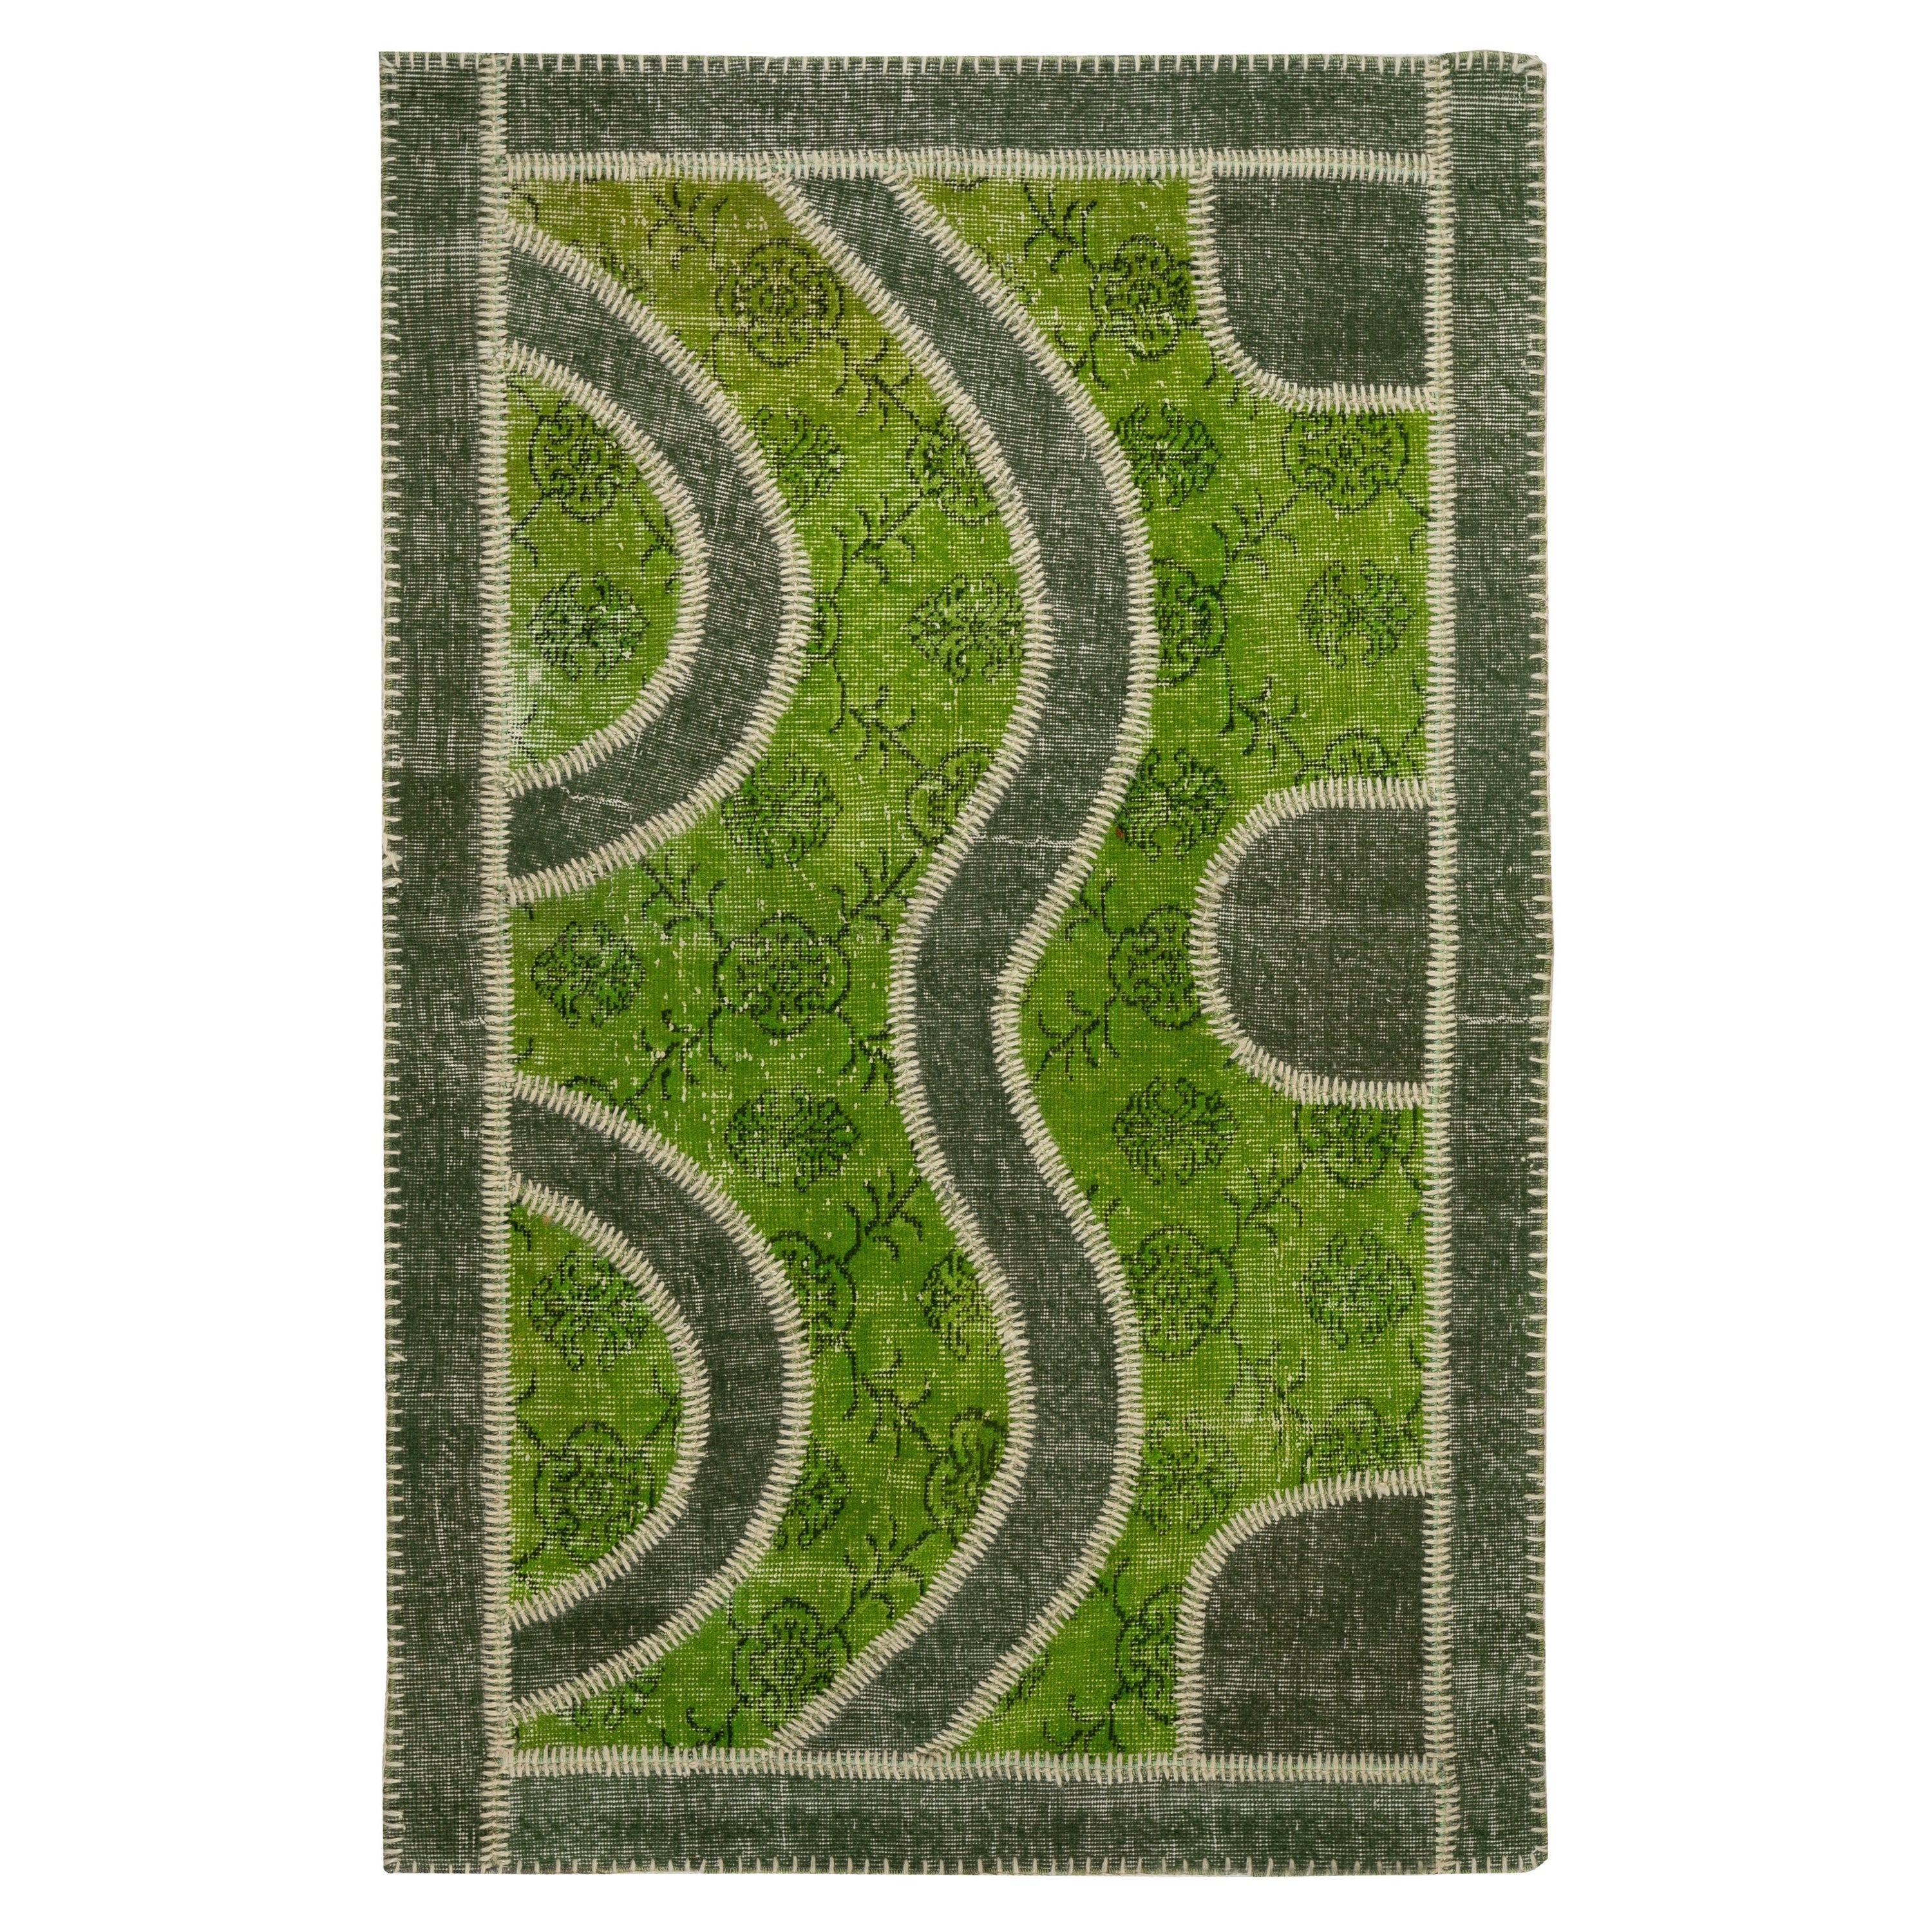 Handmade Patchwork Rug in Shades of Green. Living Room Decor Woolen Carpet For Sale